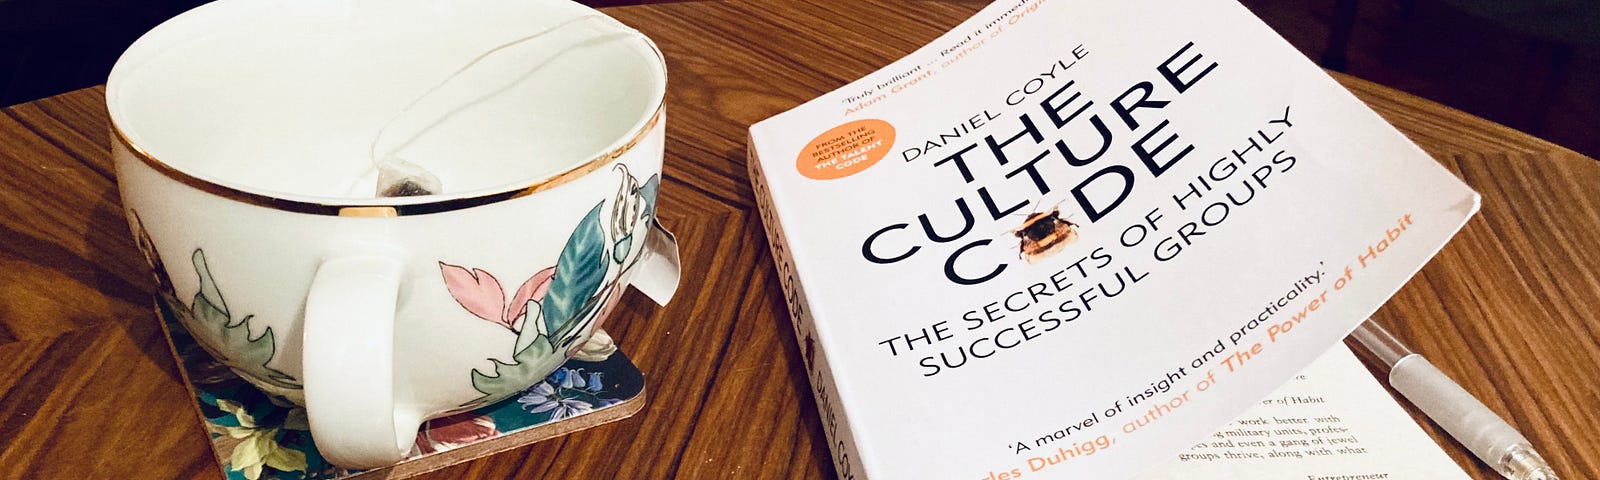 A dark wood coffee table. On the left, a white flowery tea mug, to the right a copy of the book “The Culture Code”